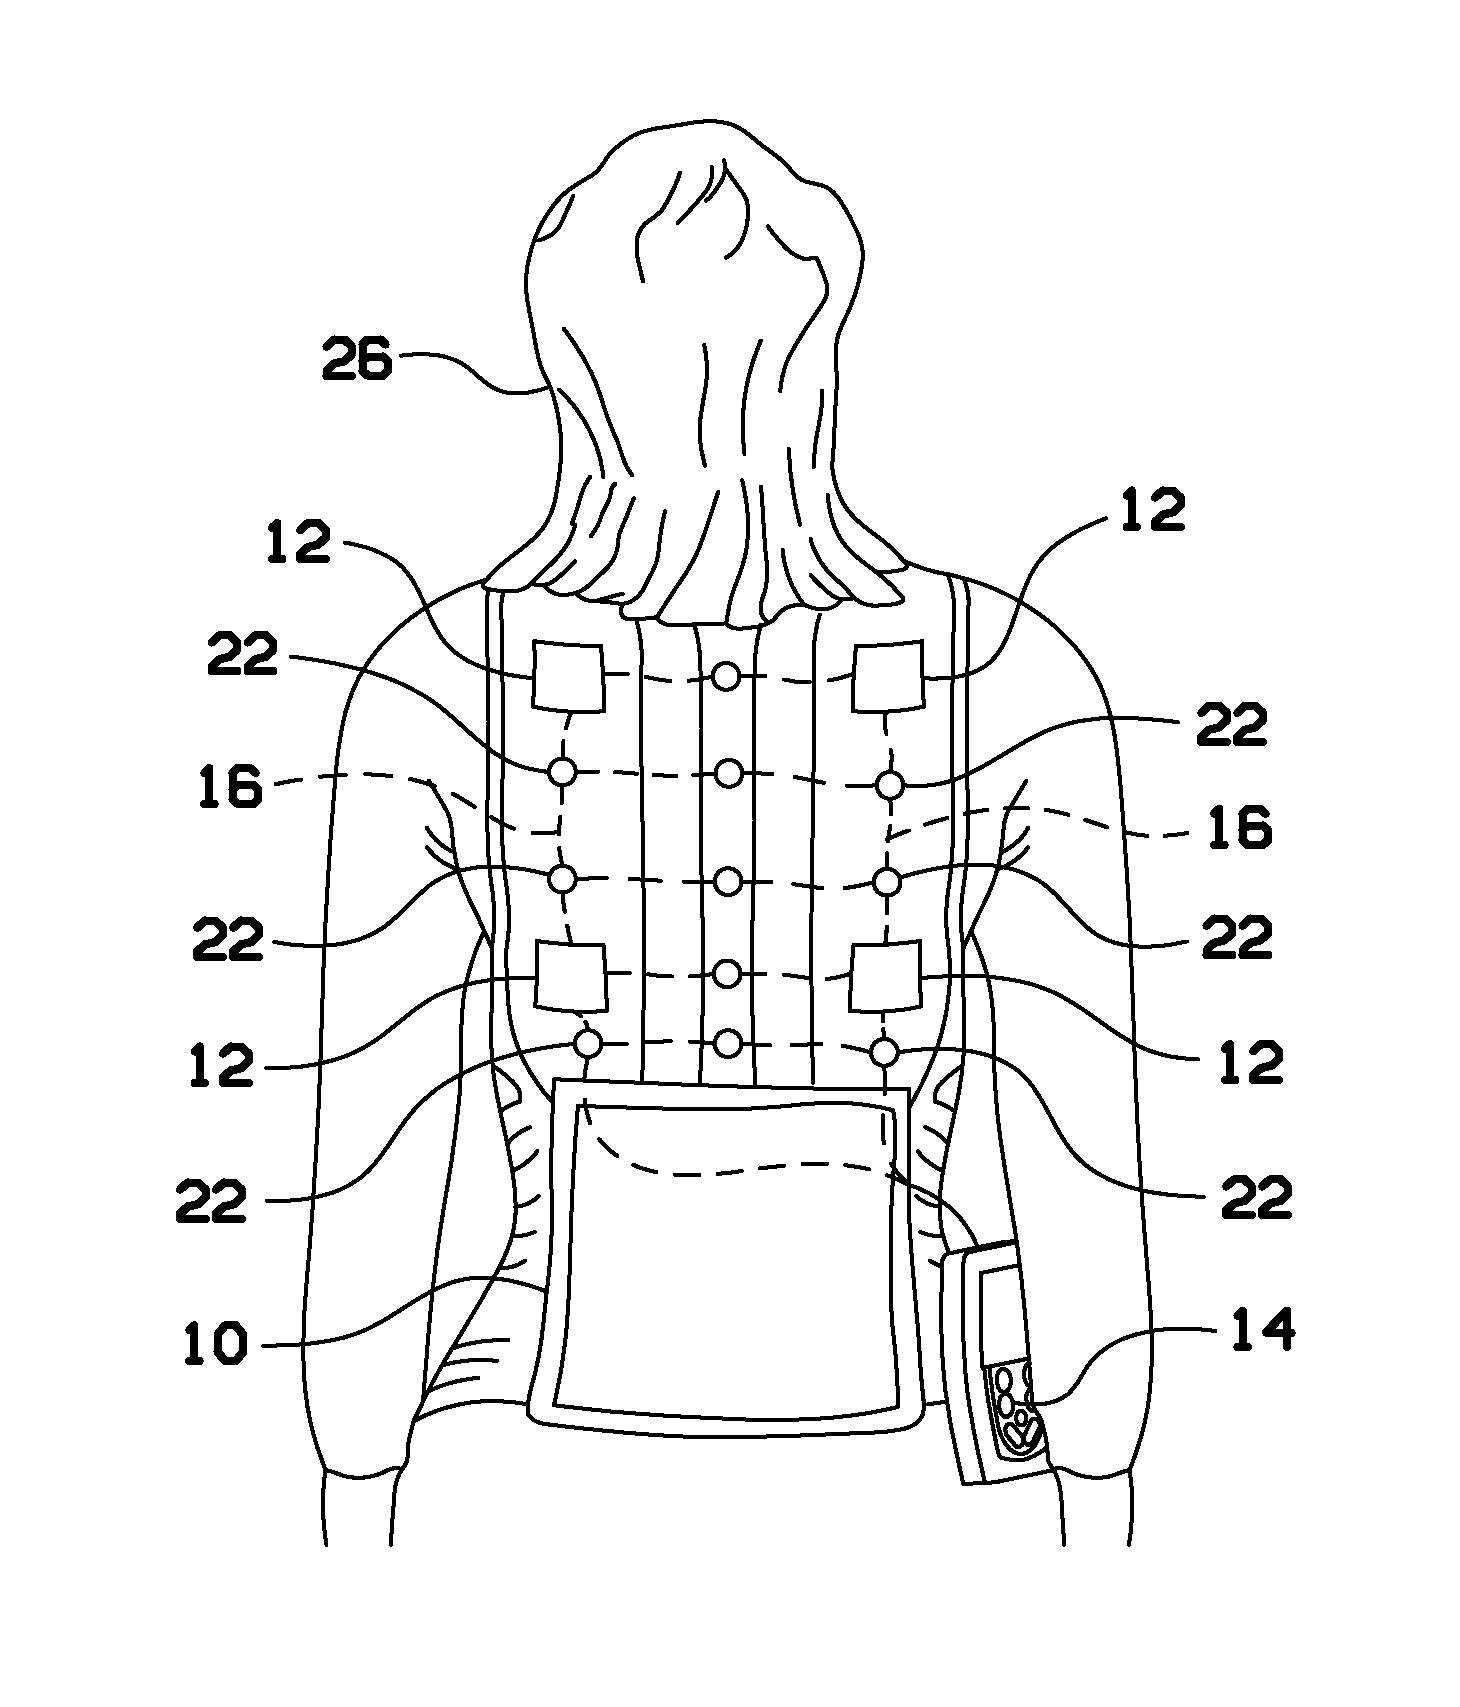 Brace, Device, and Method for Correcting Poor Posture